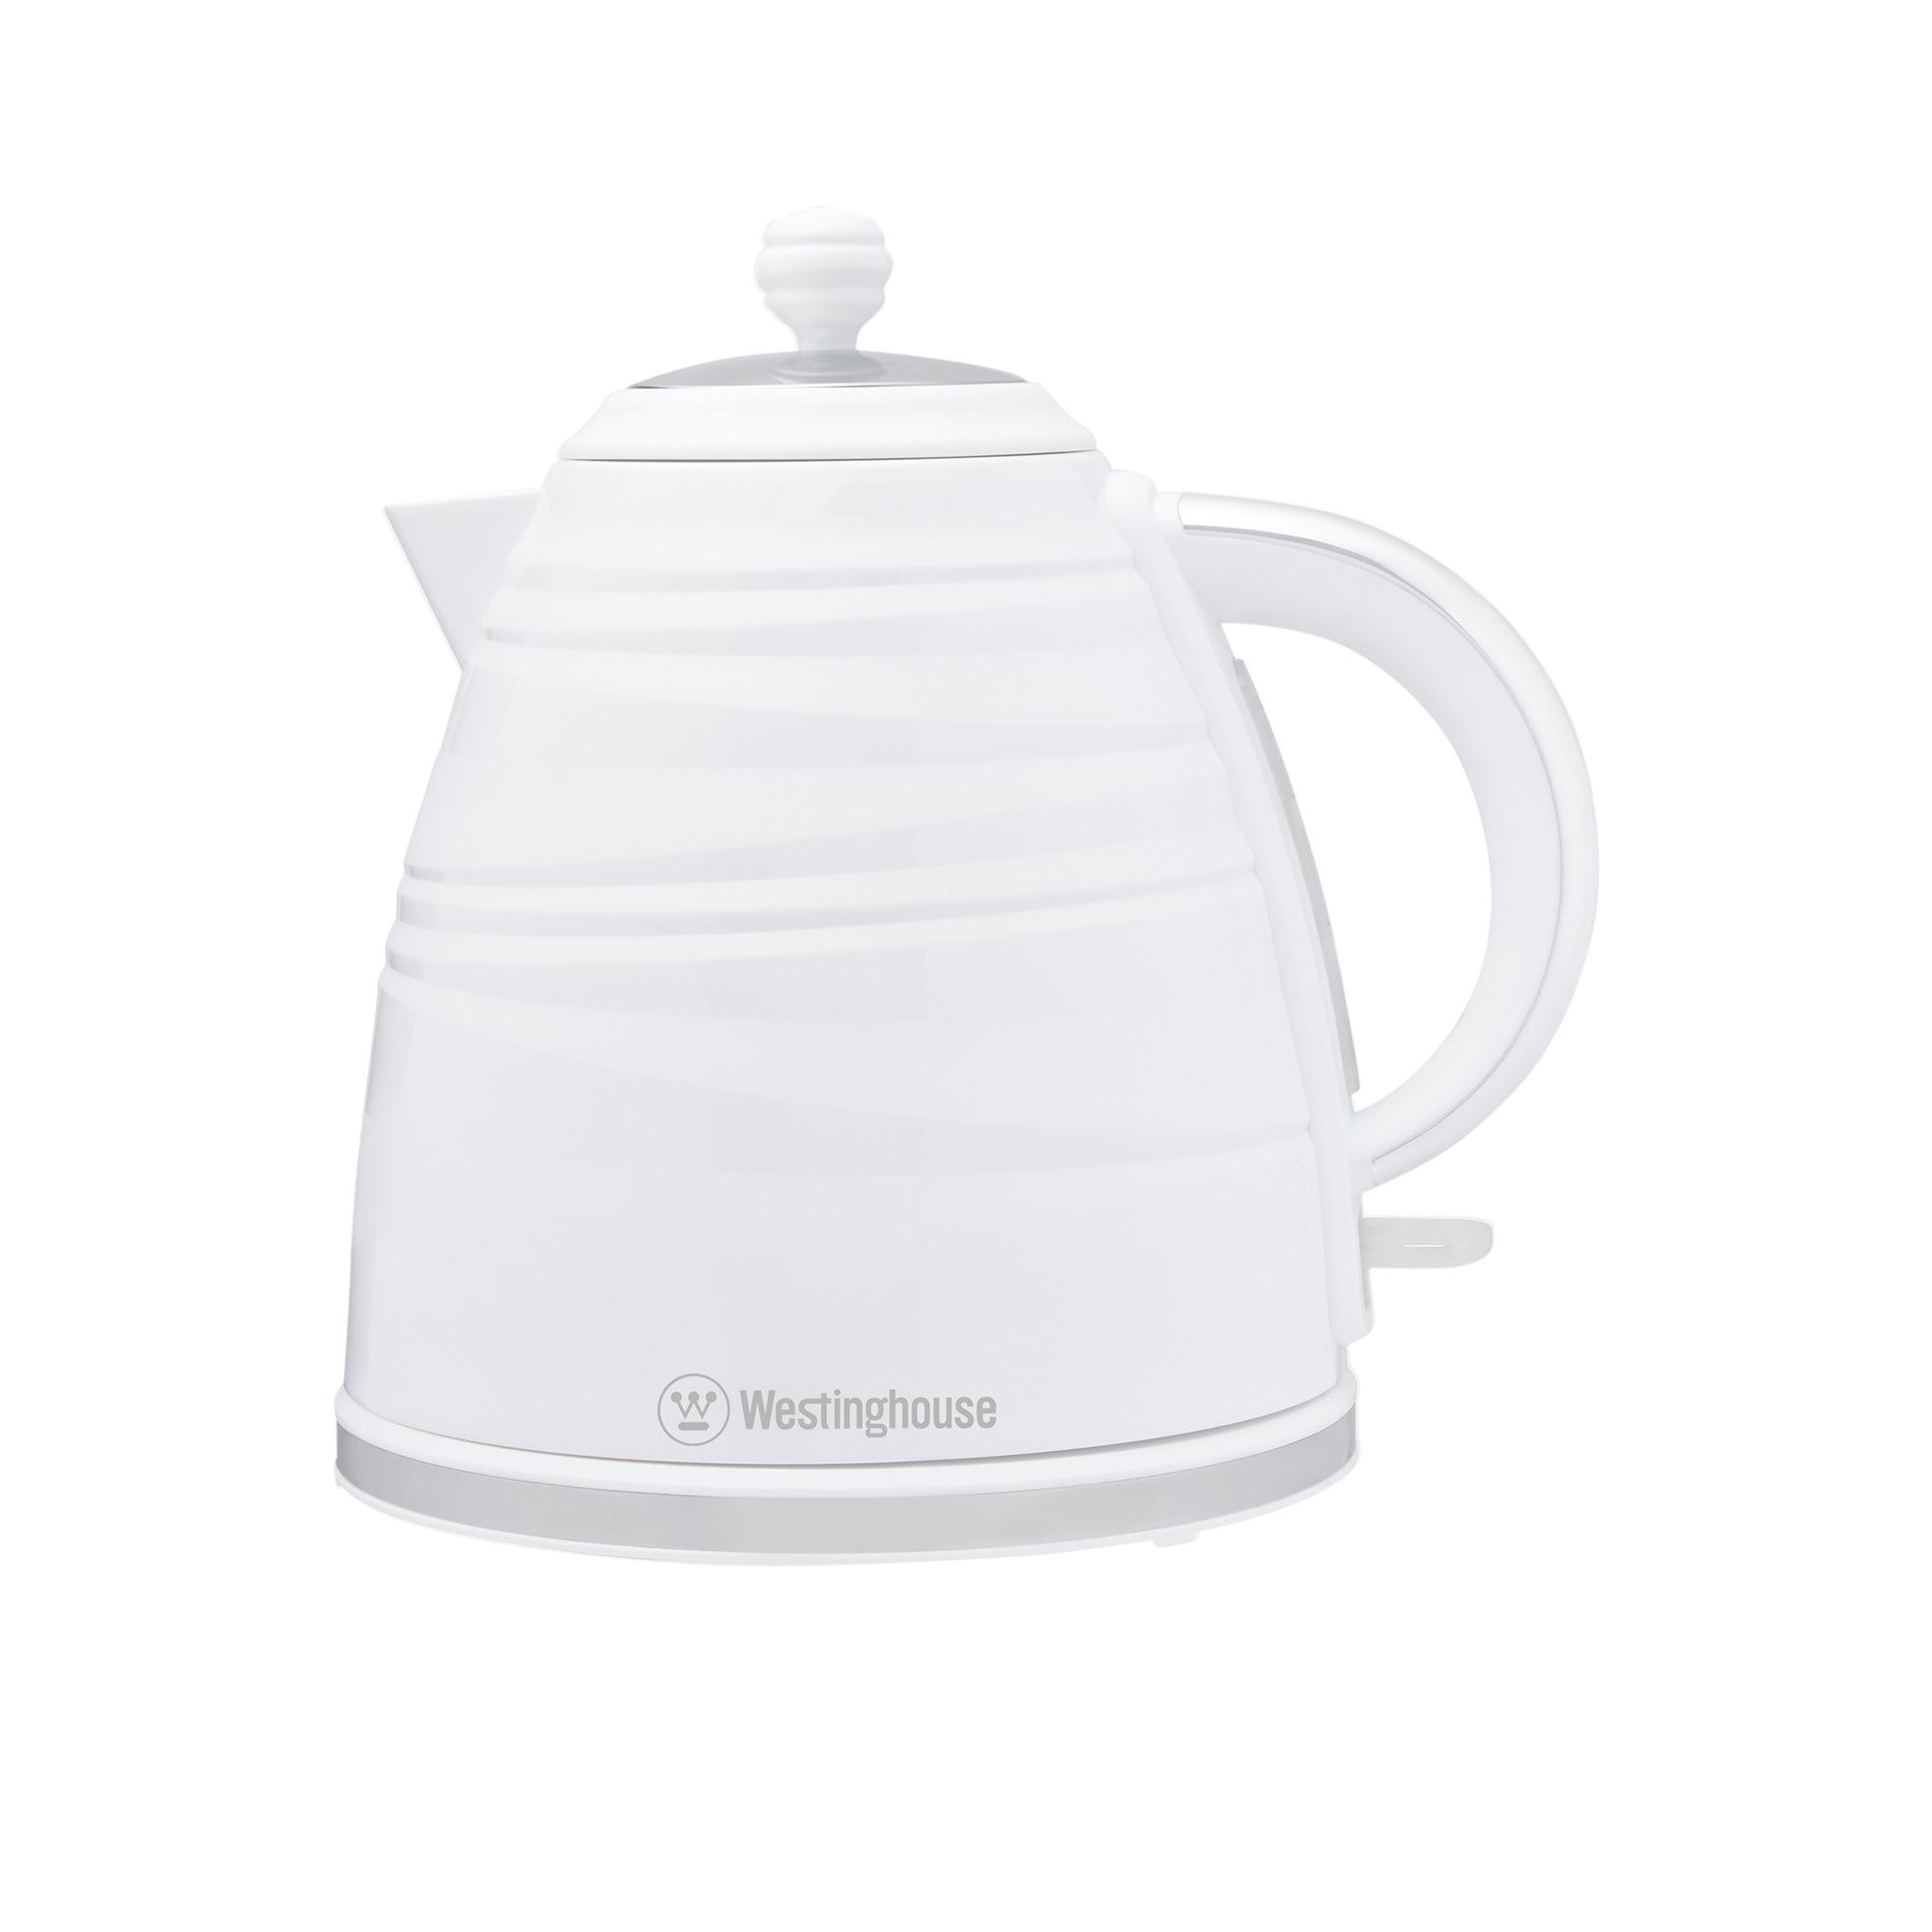 Westinghouse Kettle and Toaster Pack White Image 6